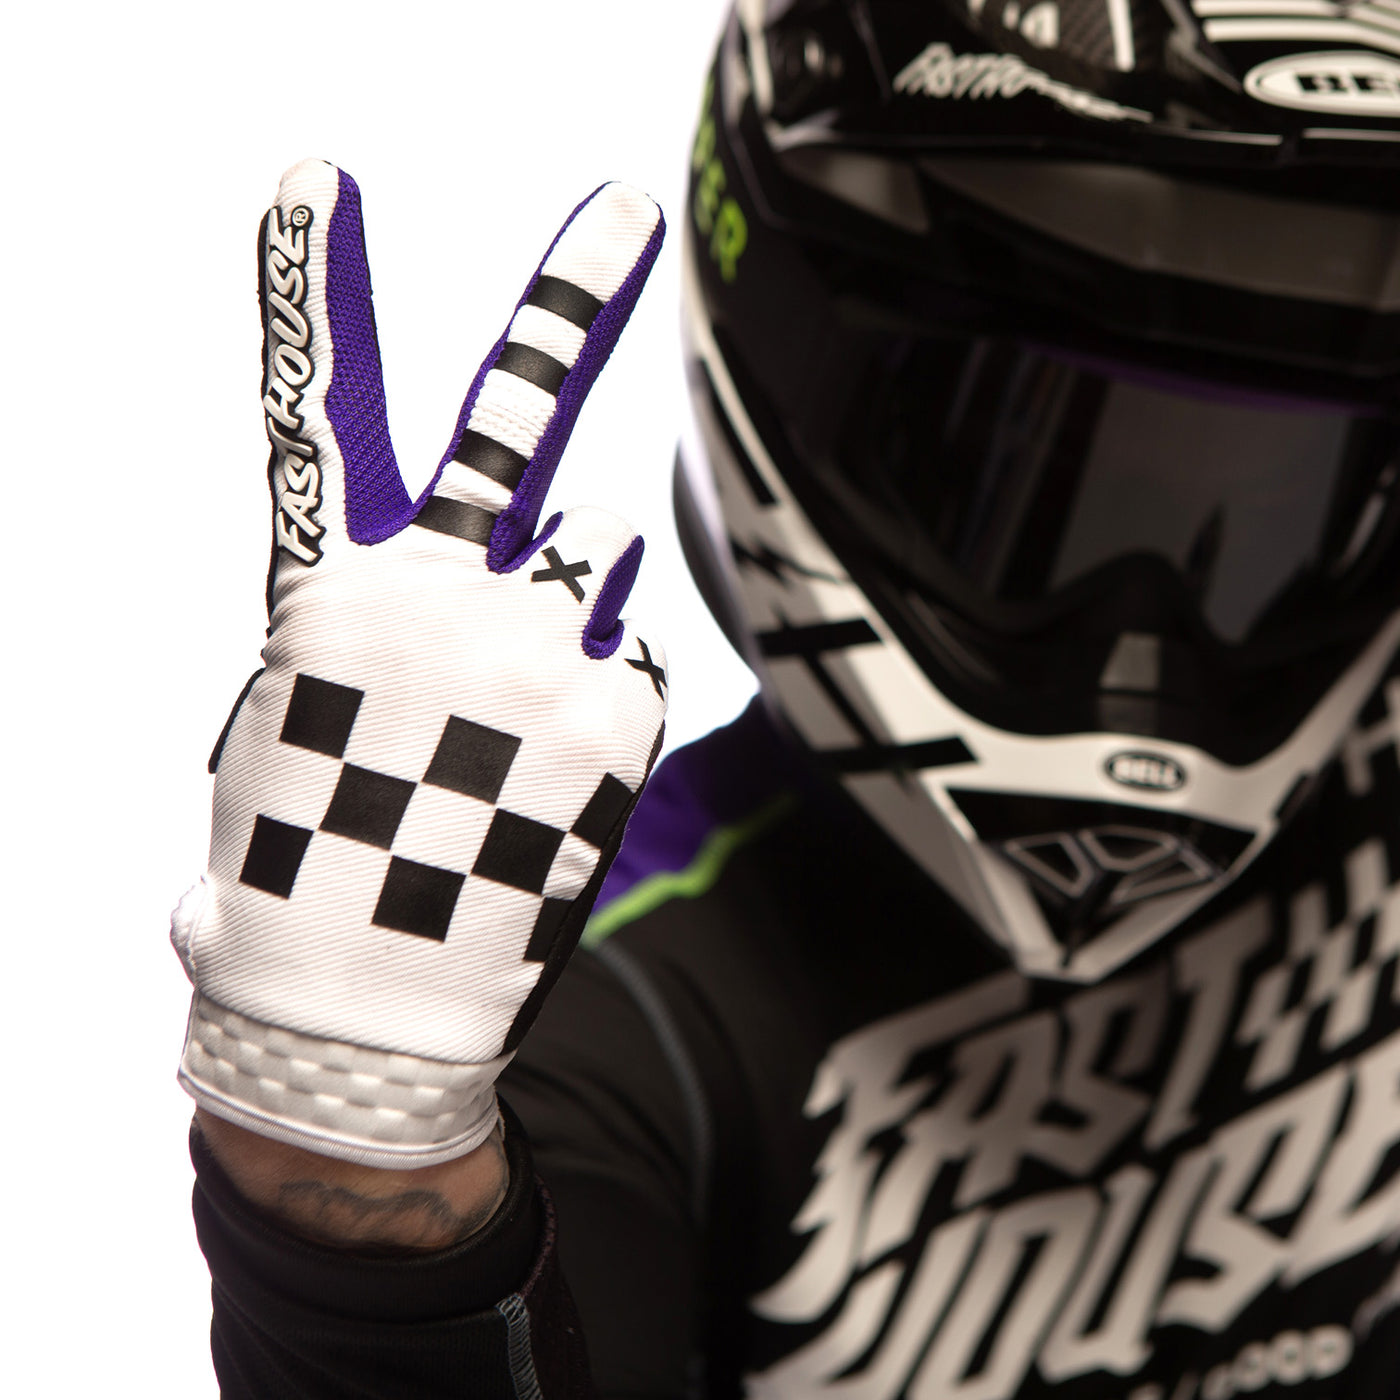 Fasthouse Speed Style Rufio Glove